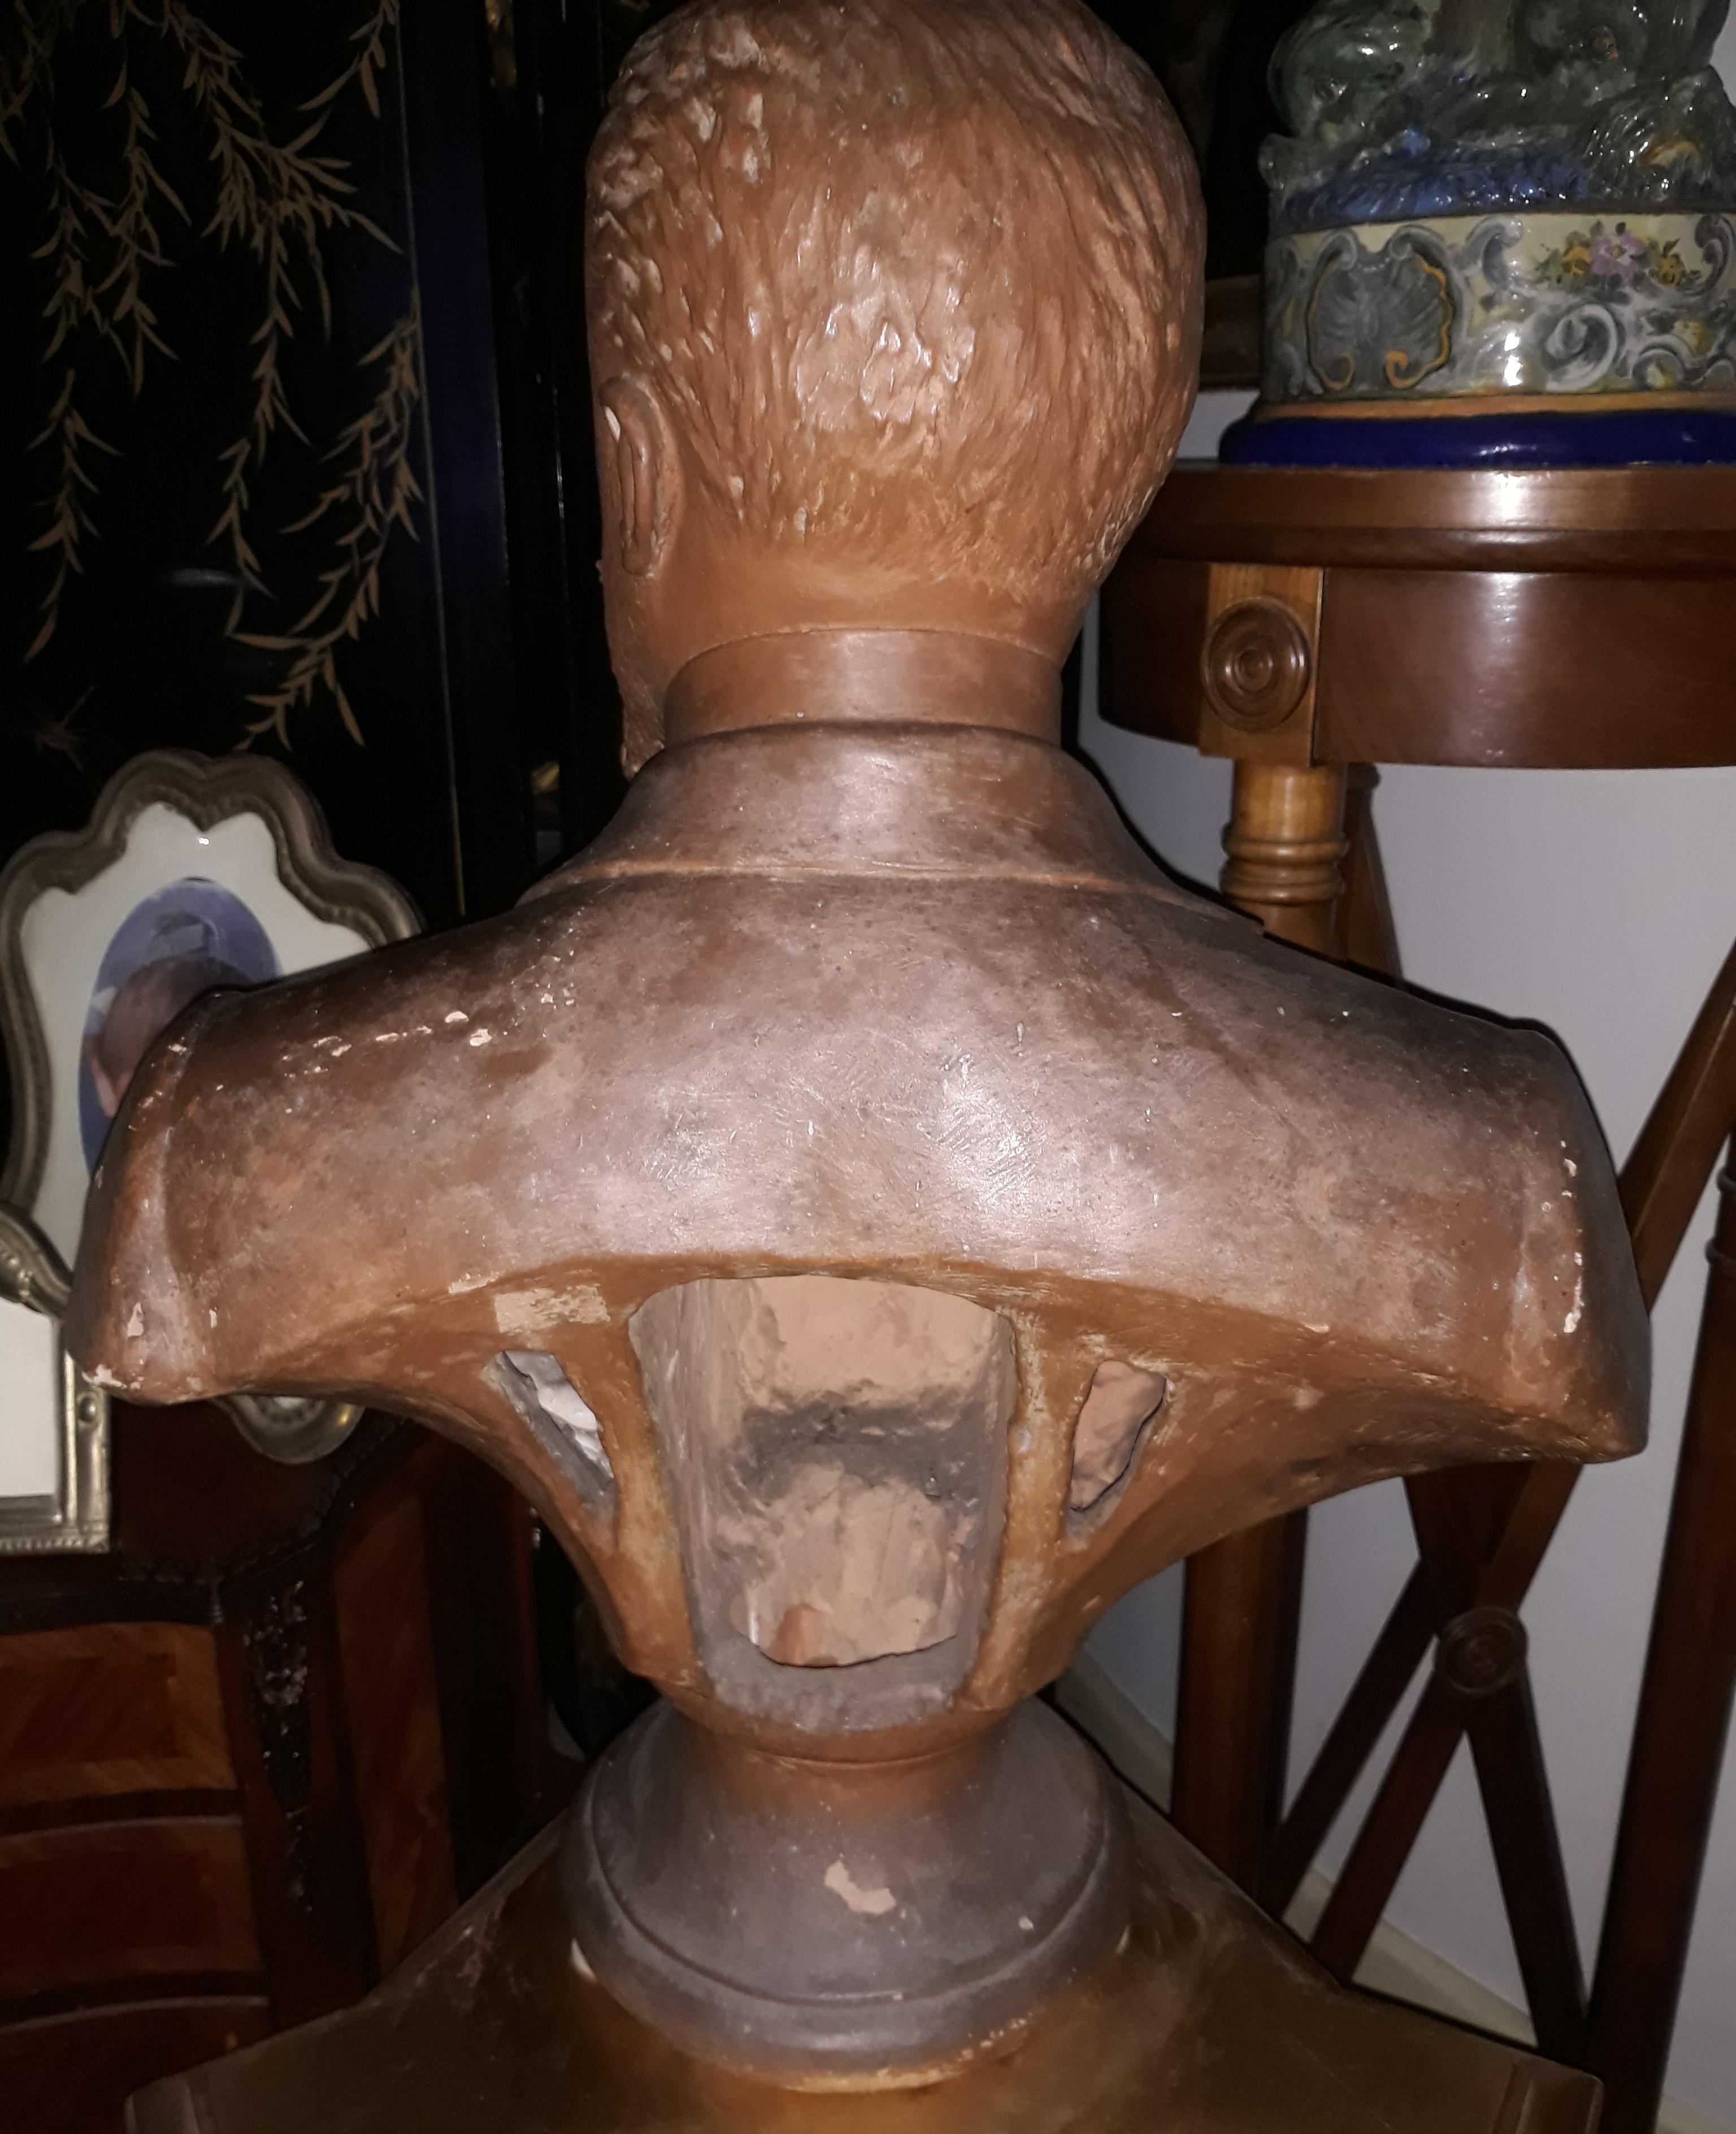 L.Fournier 1903 French Terracotta 19th century figure signed on the side
Dimensions: Height cm 65
Width cm 50
Depth cm 30.